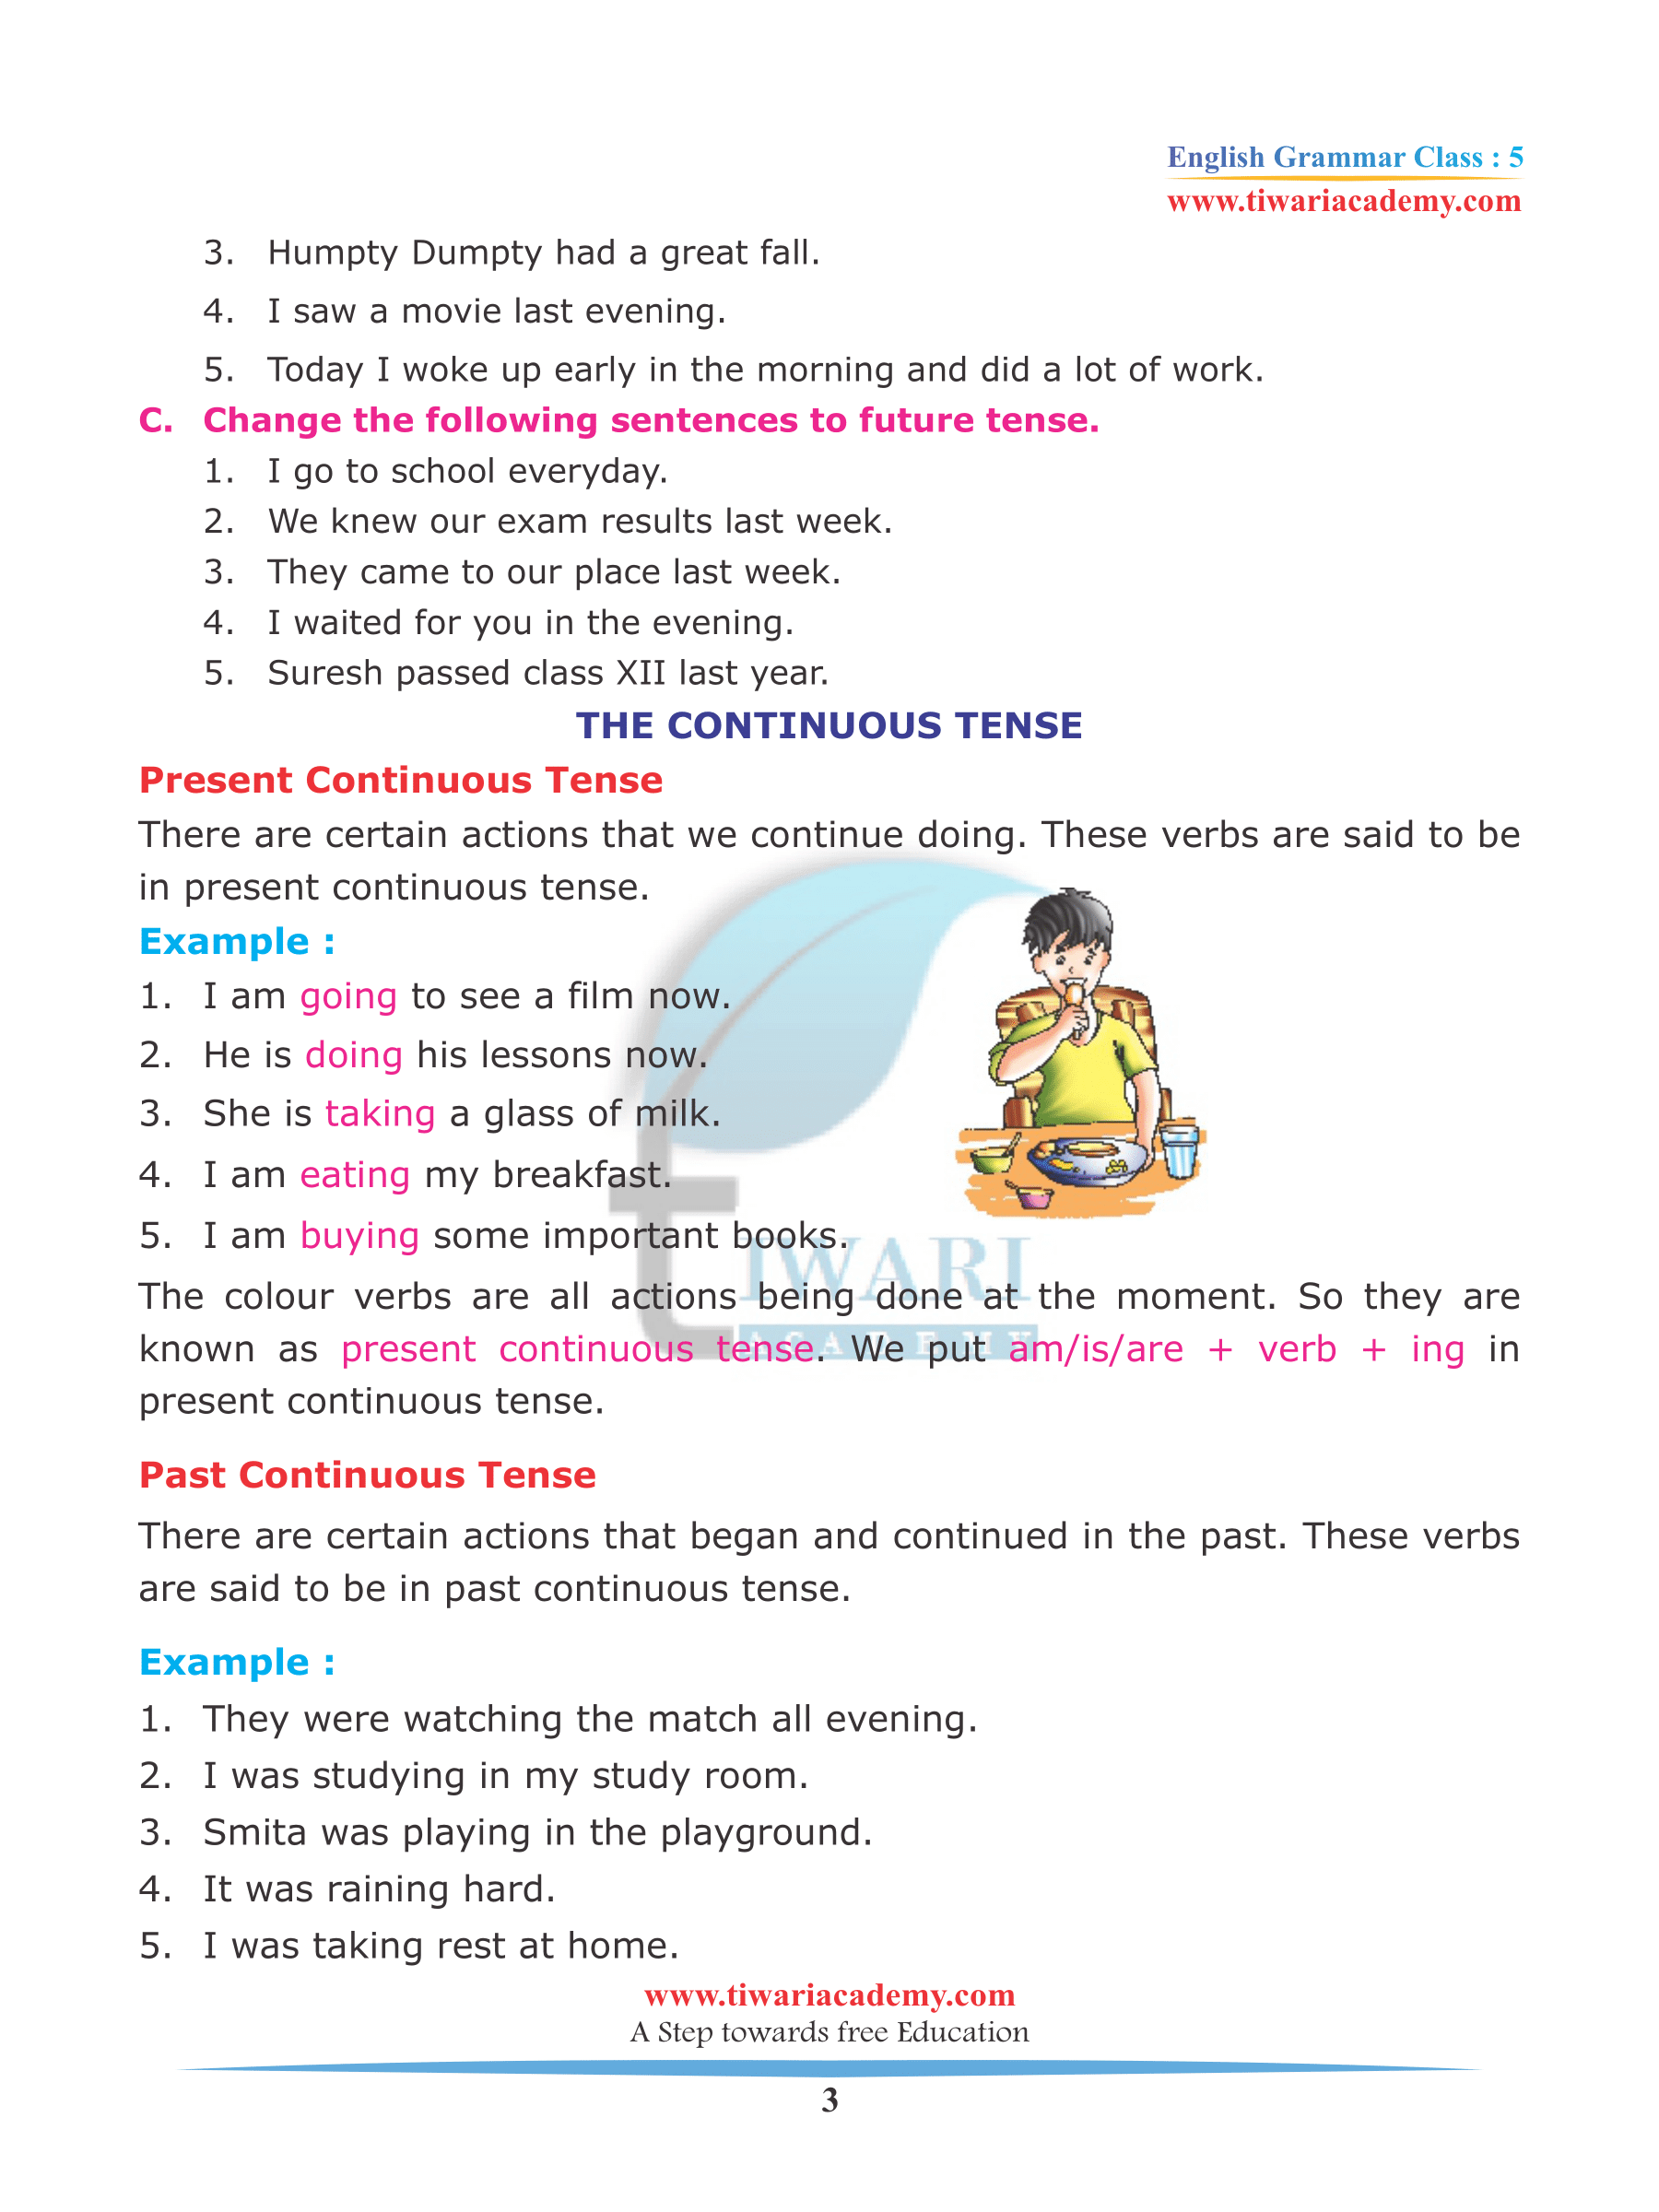 Class 5 English Grammar Chapter 6 Verb and Past Tense